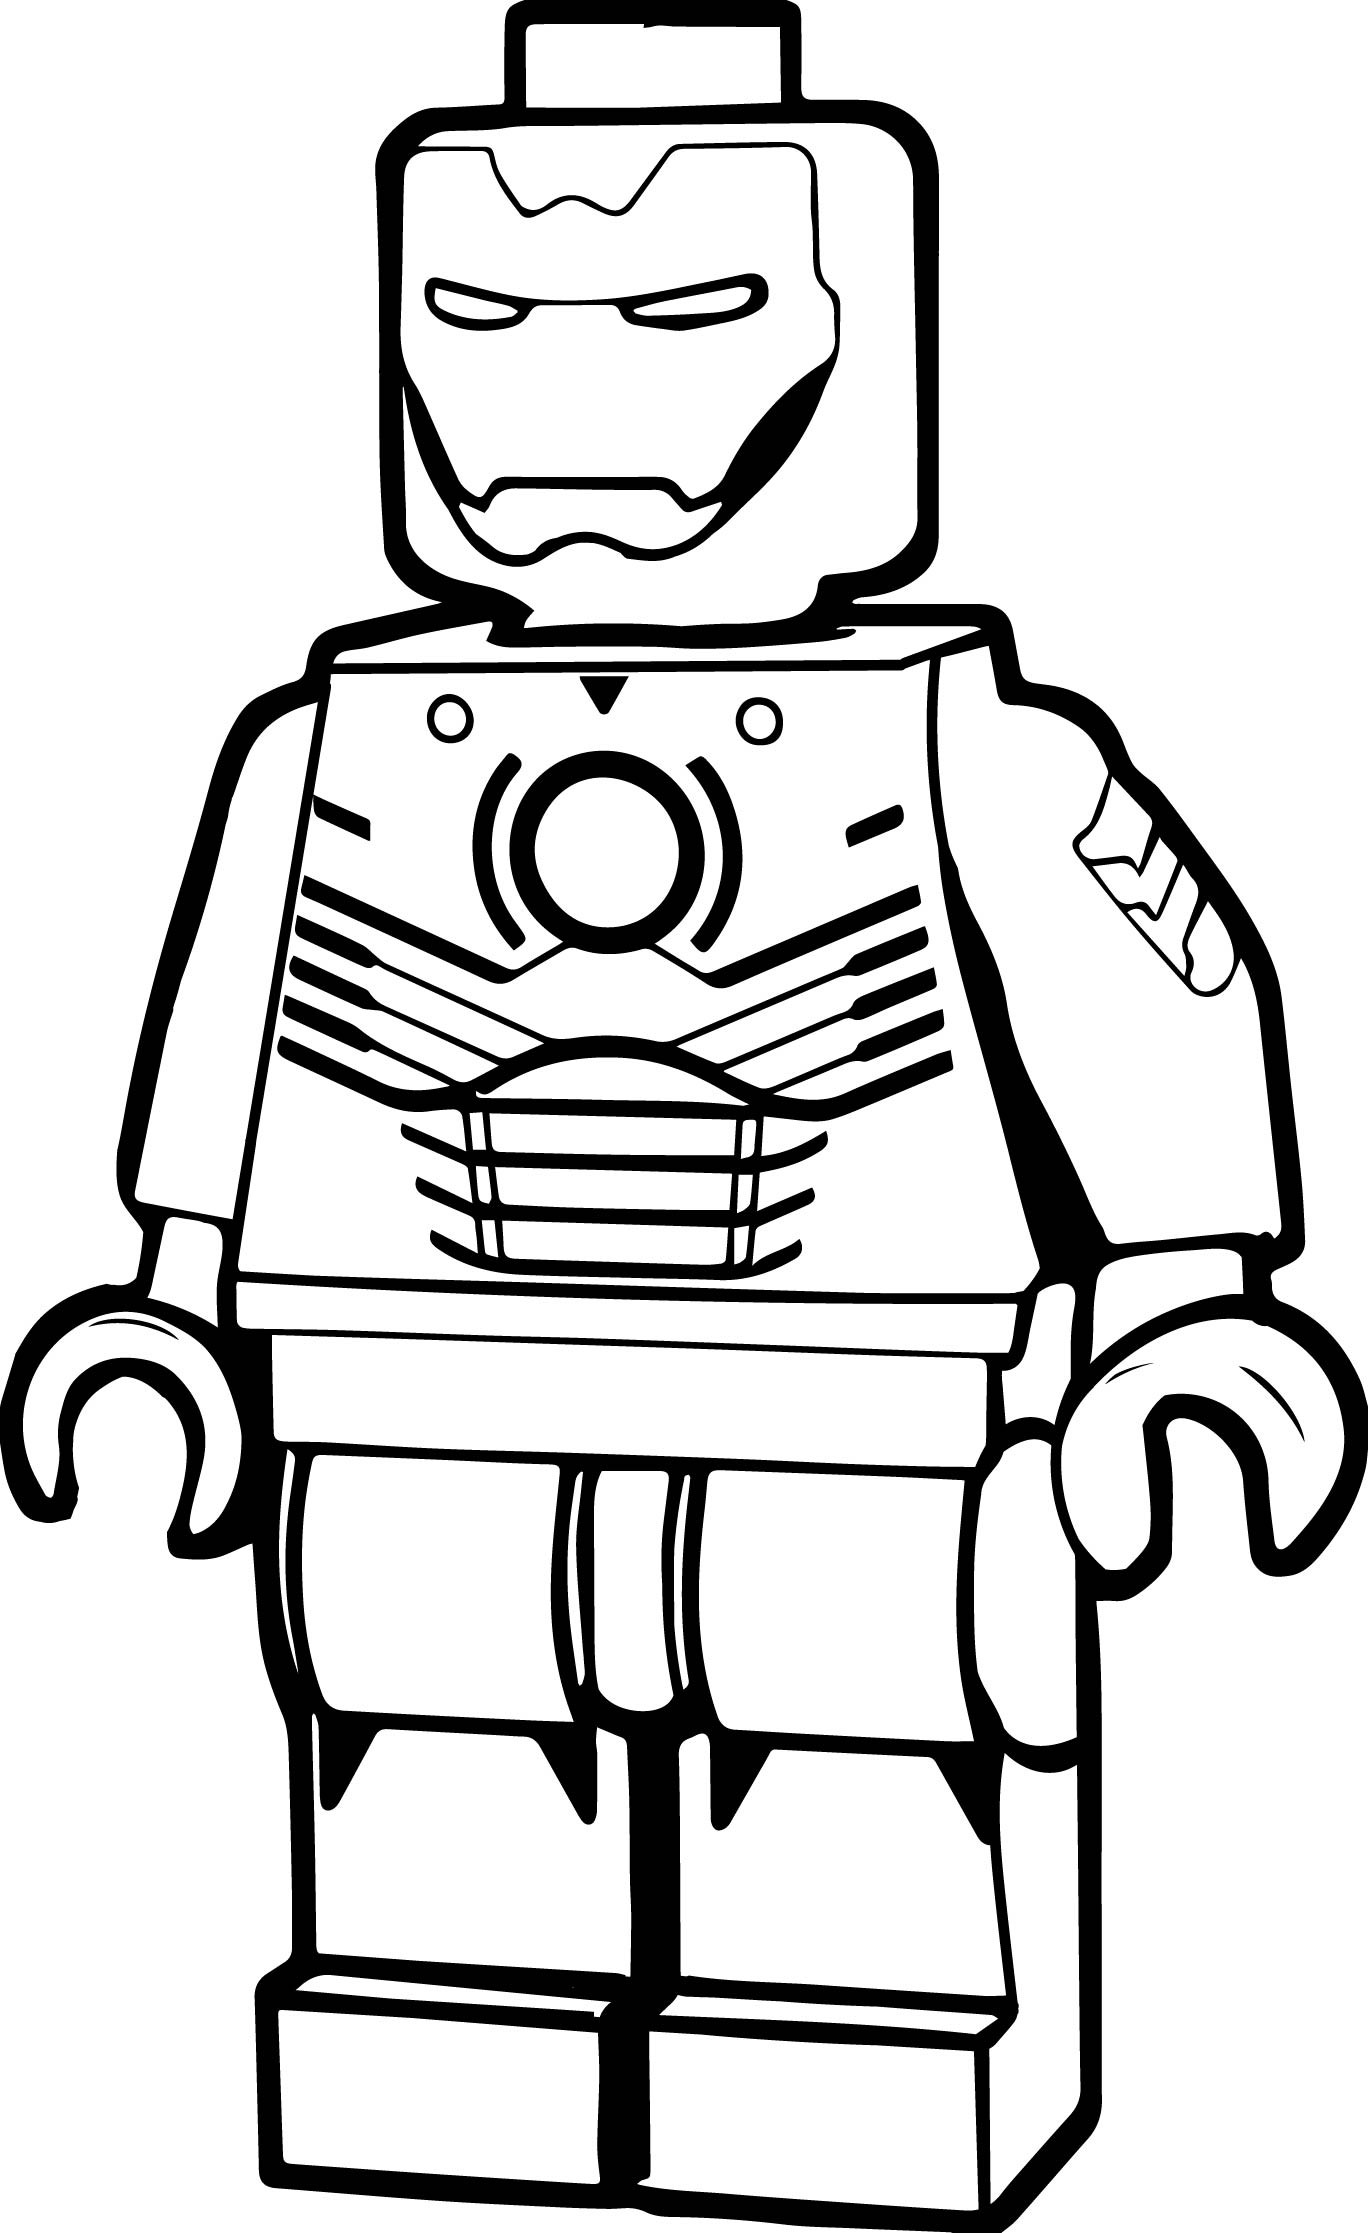 Lego Iron Man Coloring Pages at GetDrawings | Free download